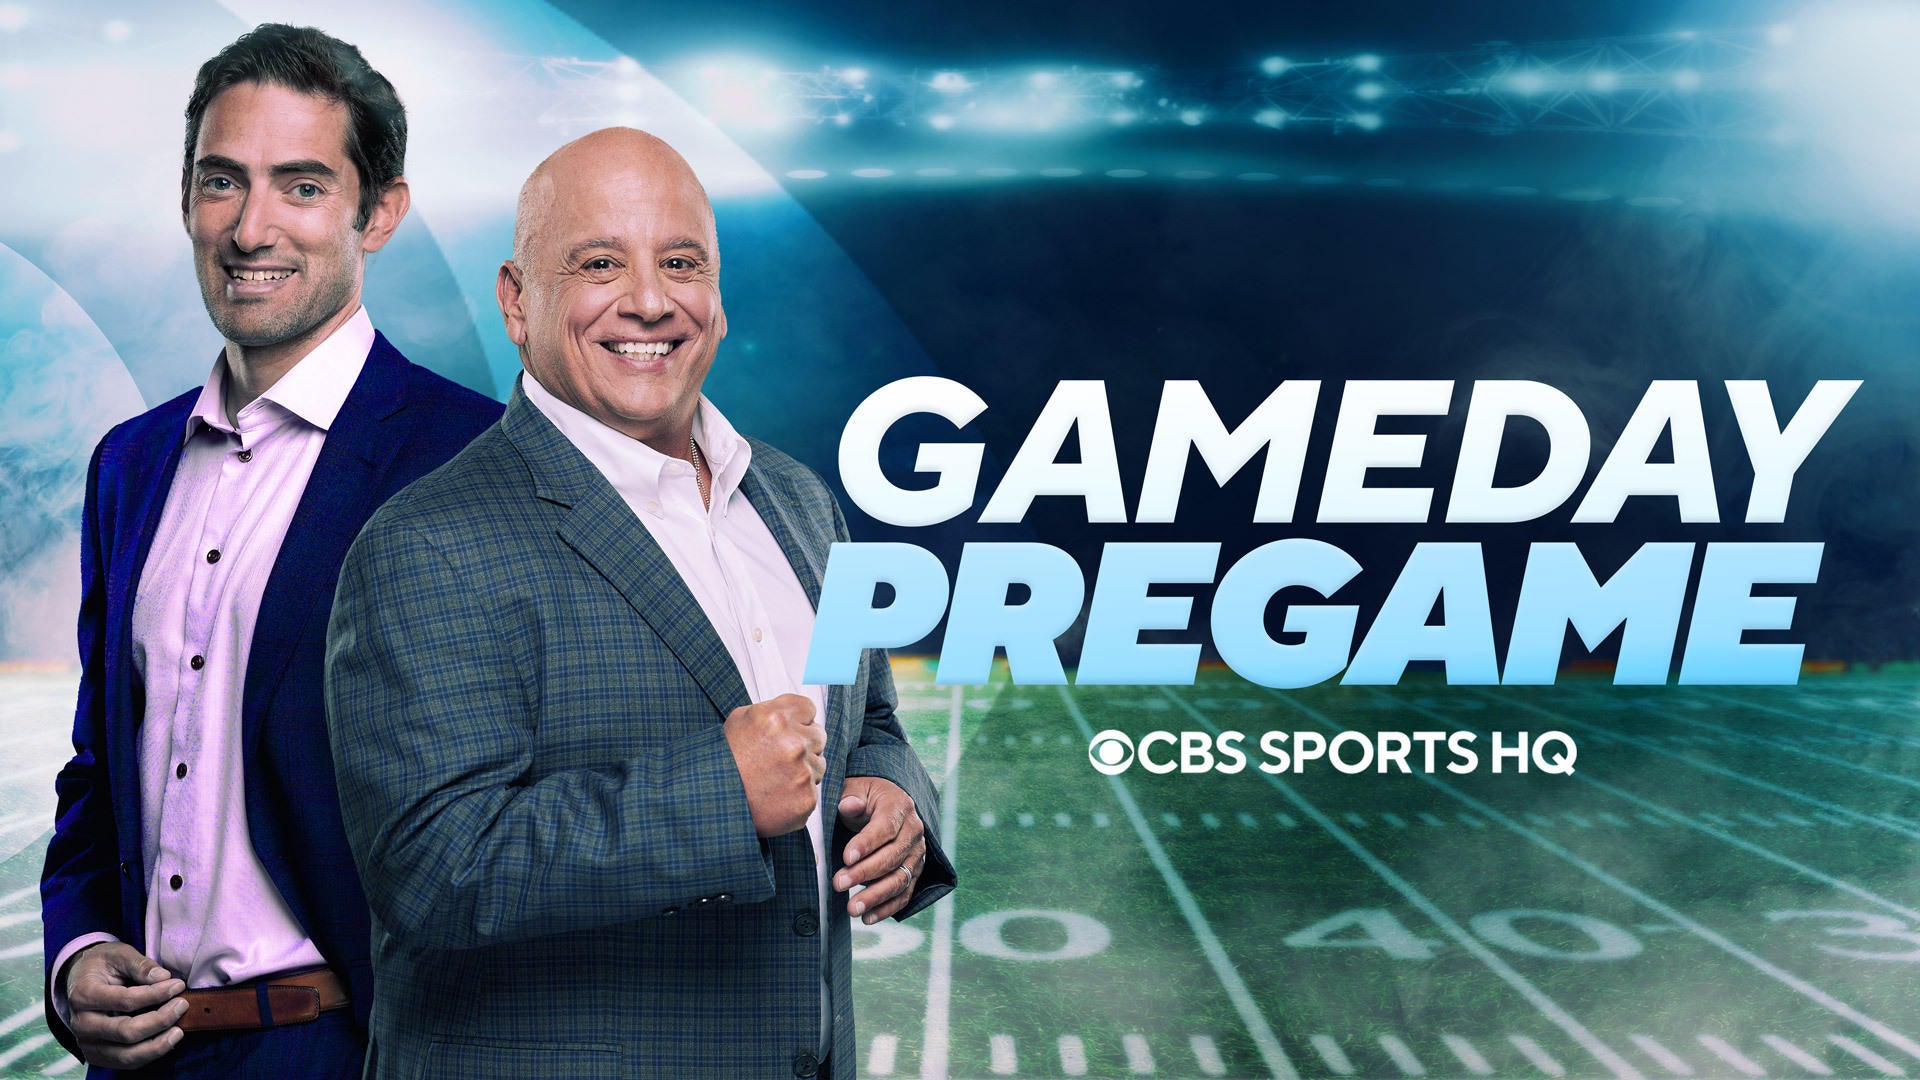 CBS Sports - News, Live Scores, Schedules, Fantasy Games, Video and more.